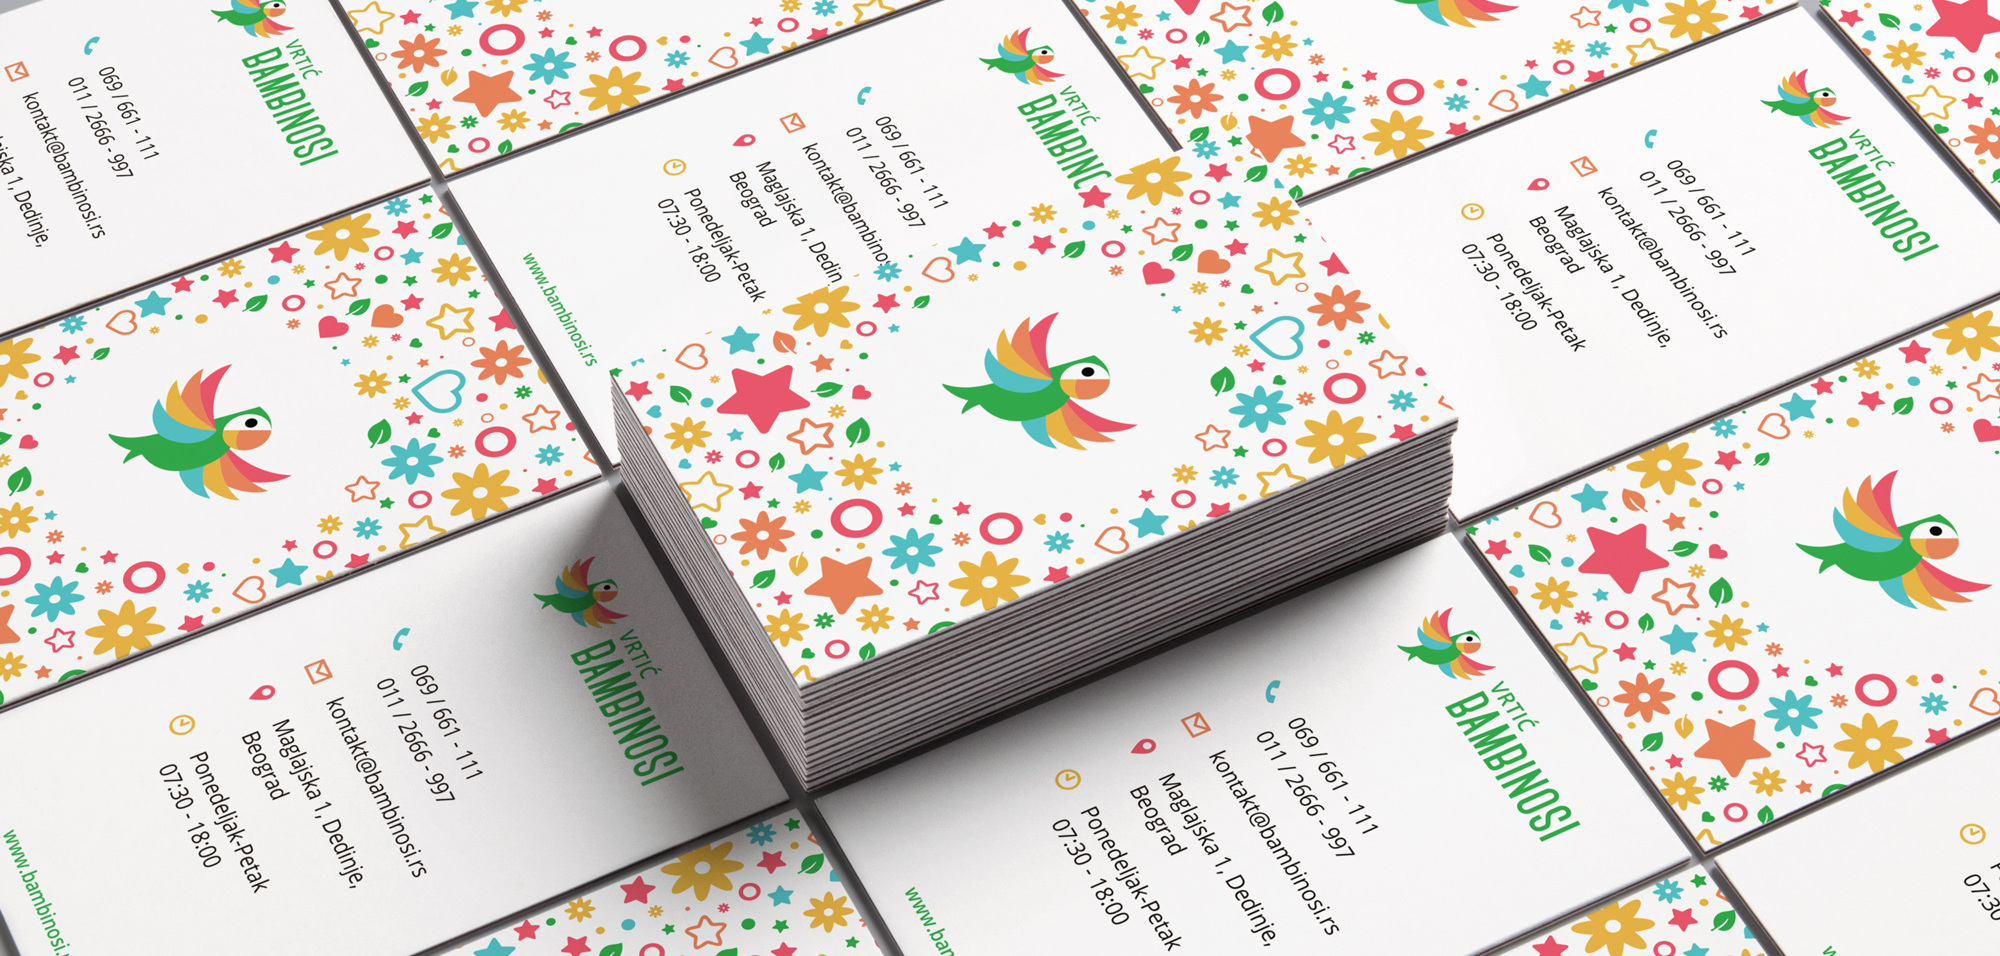 bambinosi brand identity design - mockup of a colorful business card design using the brand pattern design